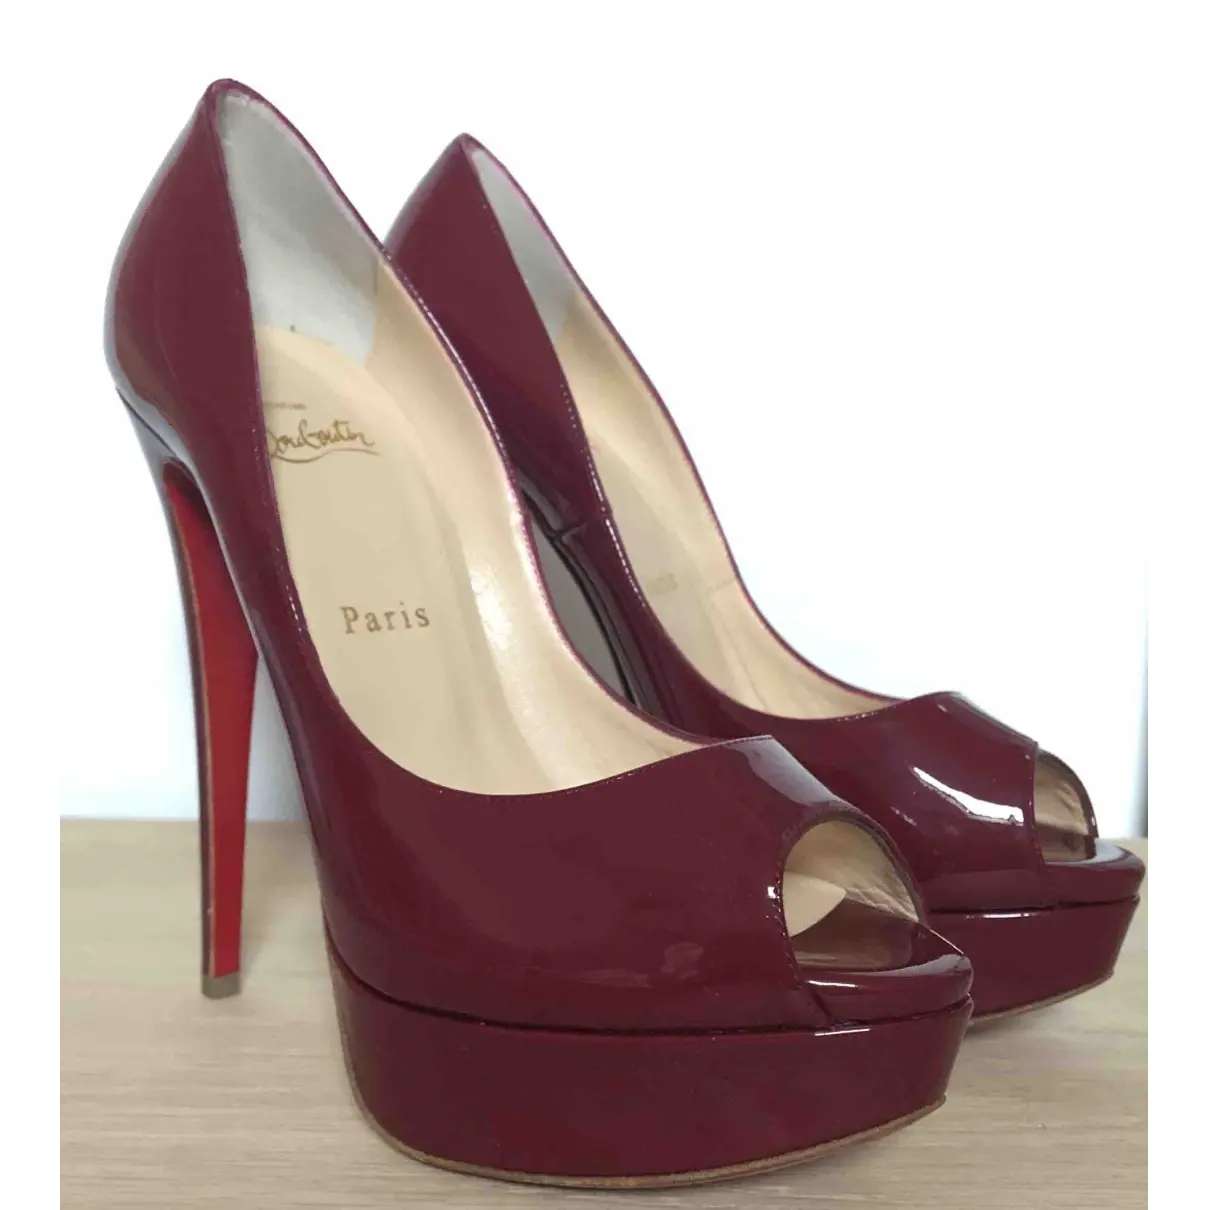 Christian Louboutin Lady Peep patent leather heels for sale